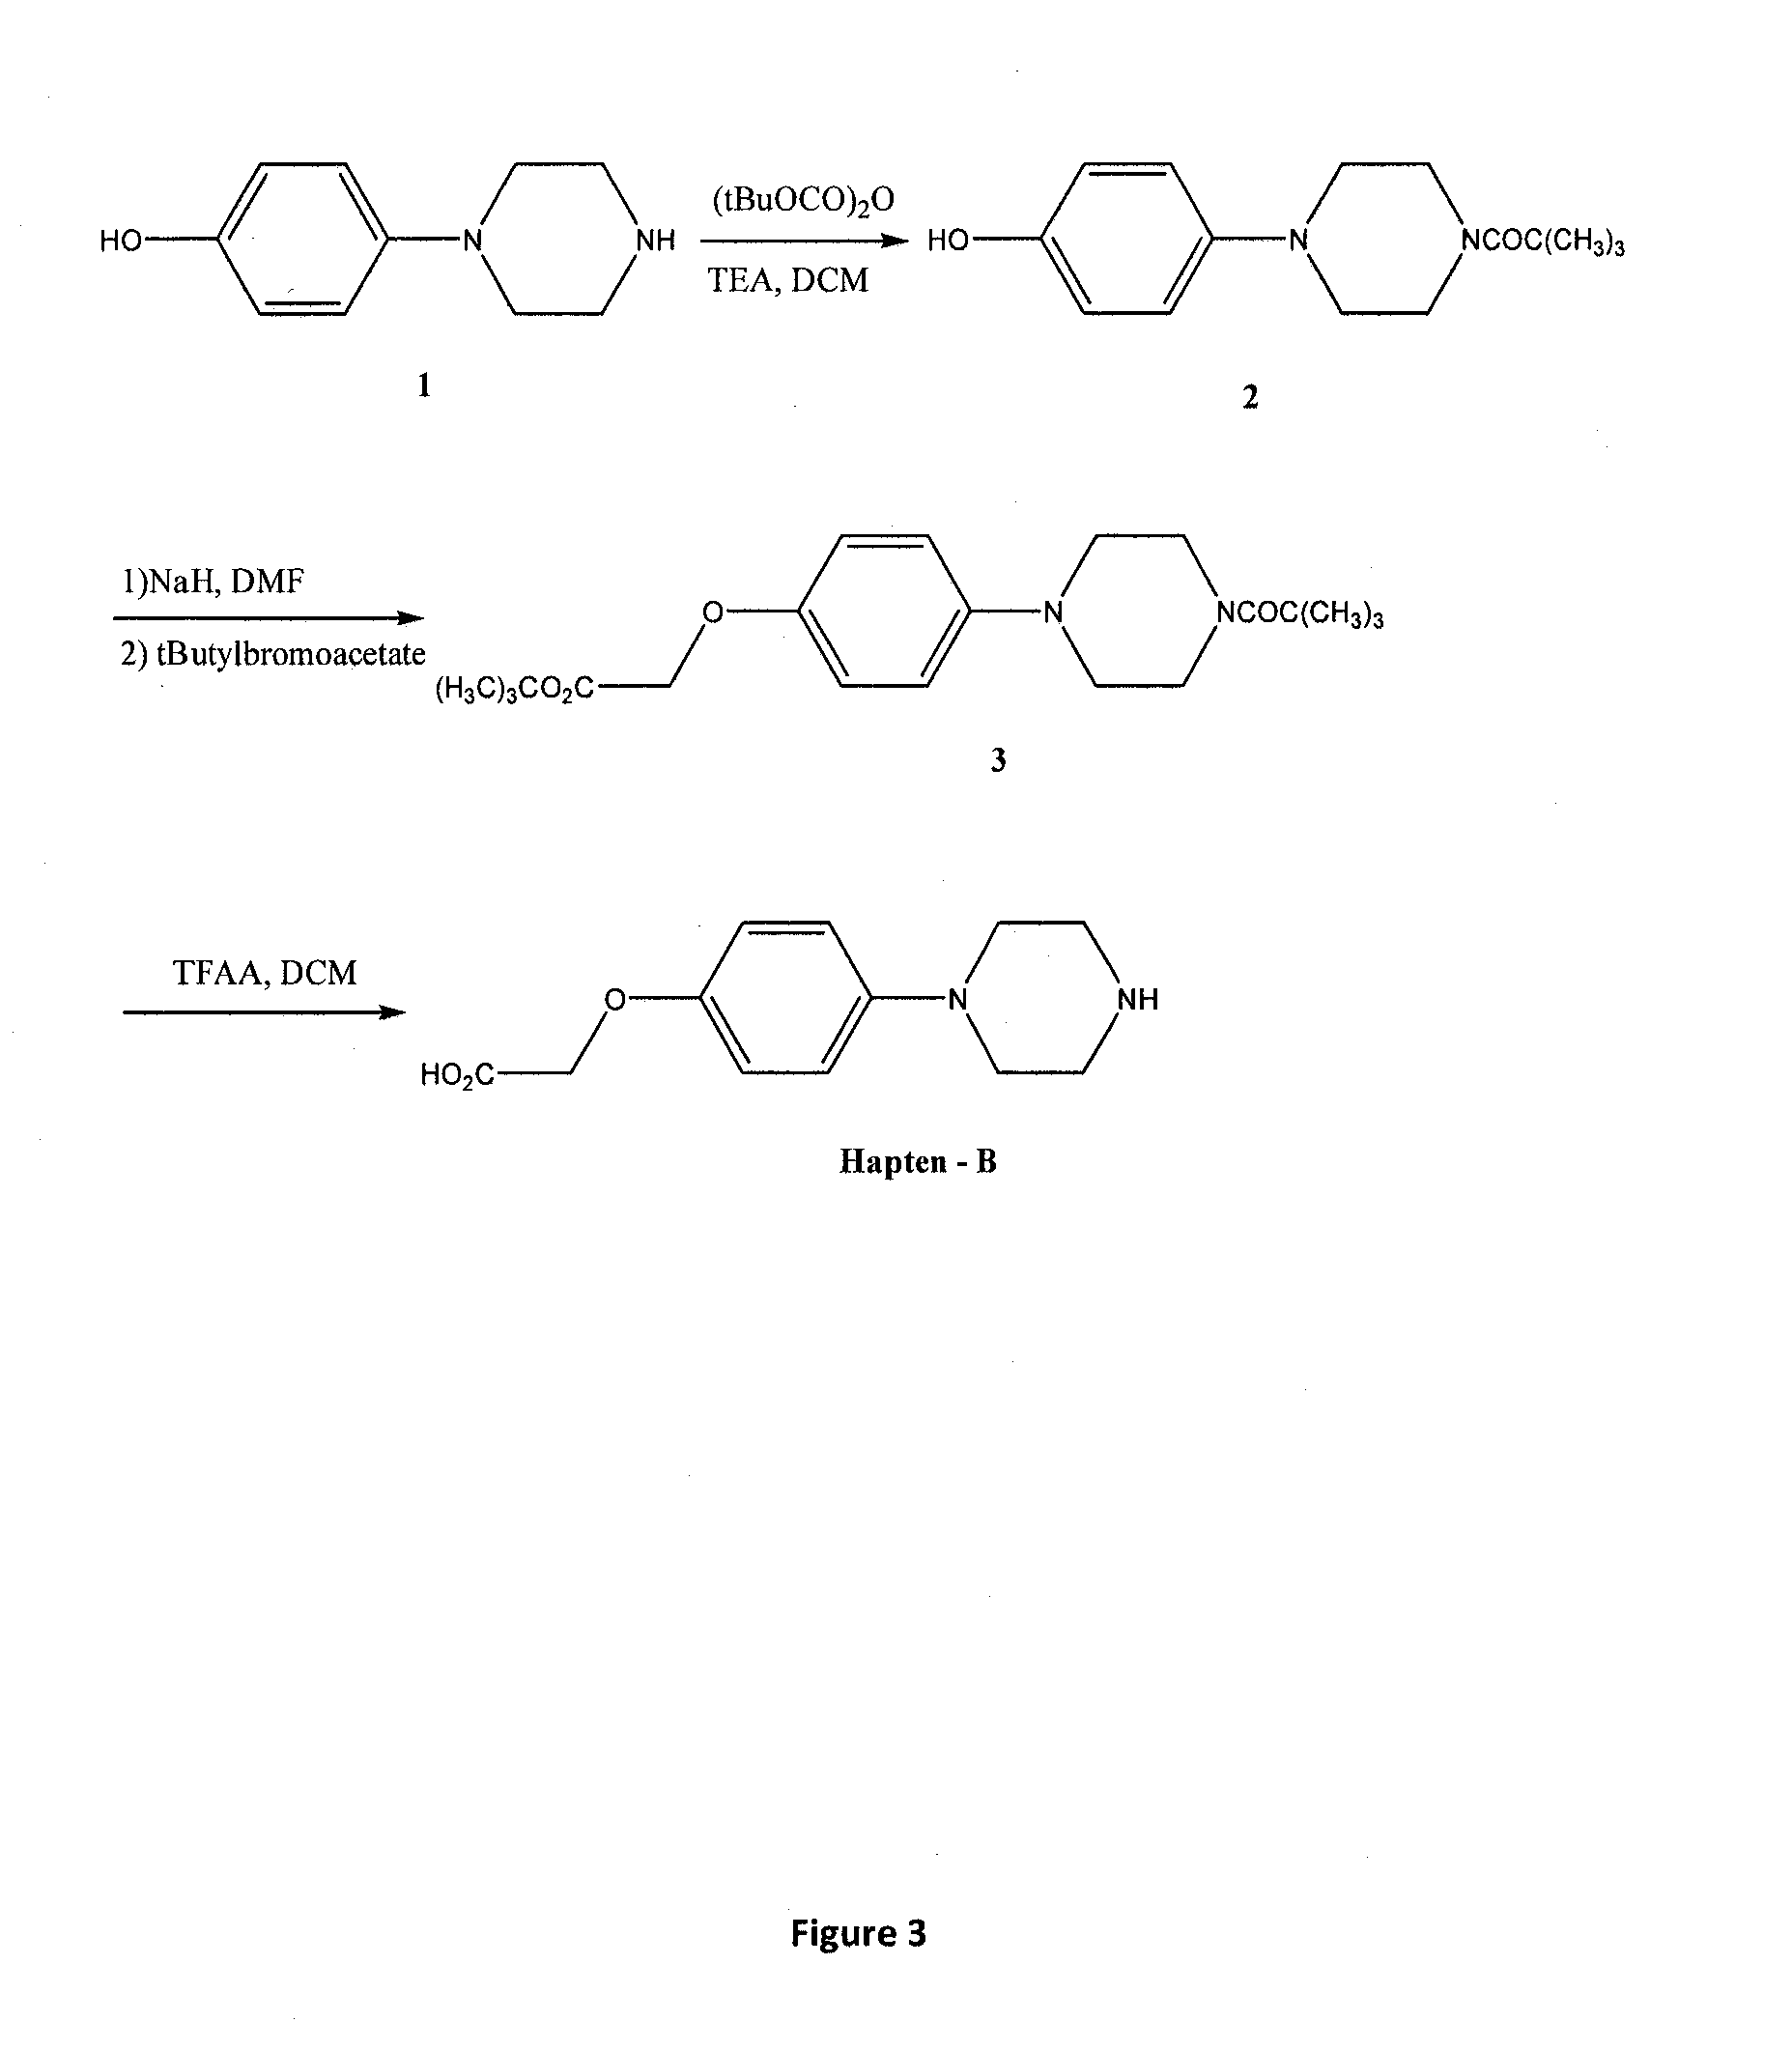 Assay for the Detection of the Phenylpiperazine Family